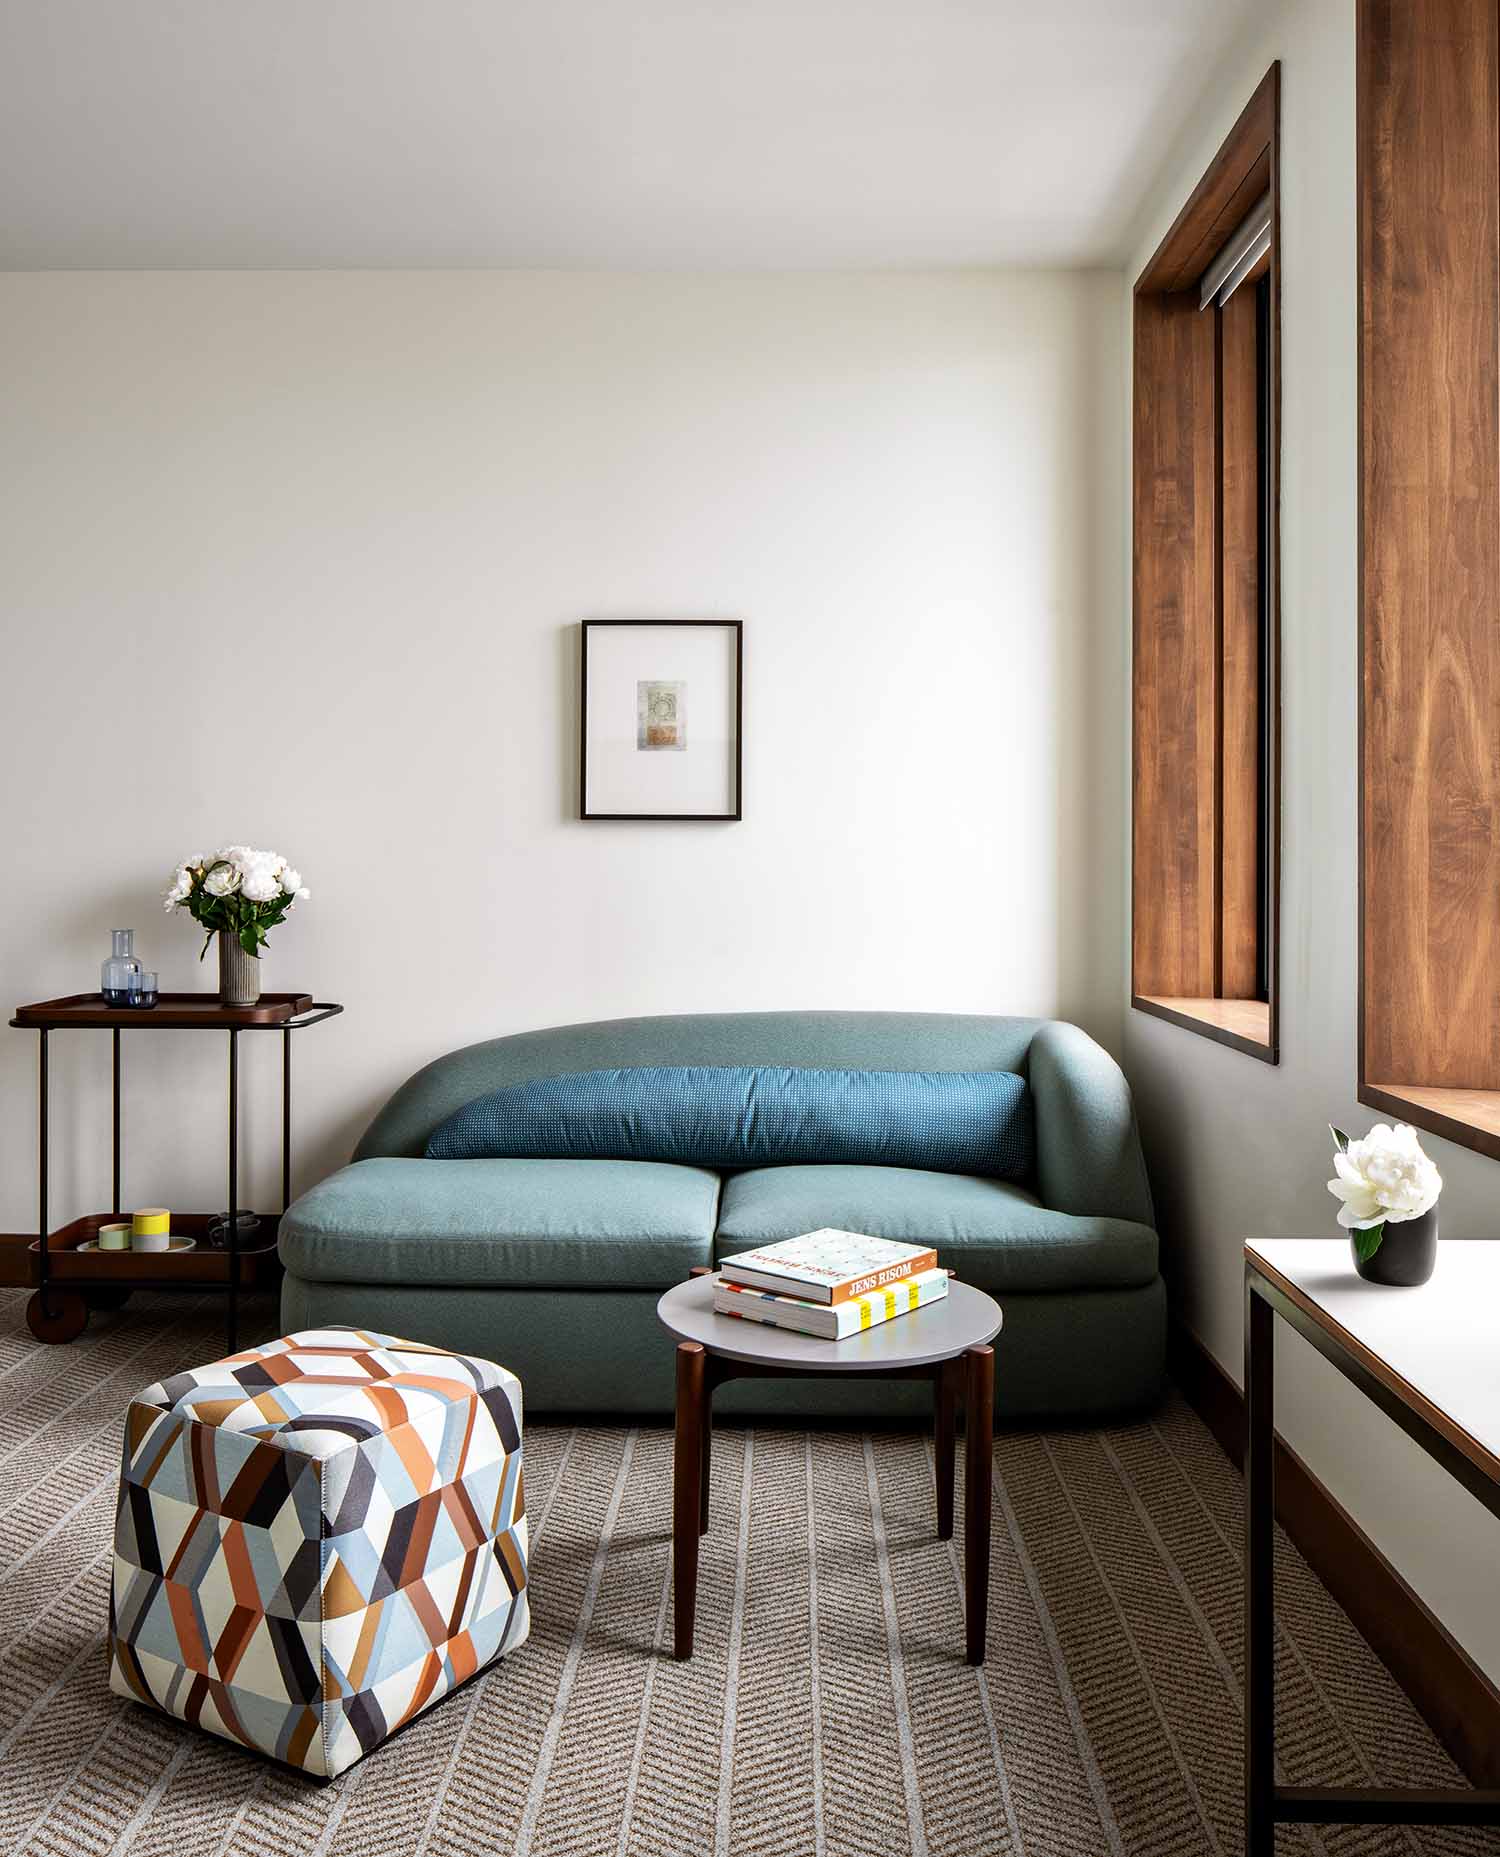 Hotel Marcel - © Seamus Payne, courtesy Becker + Becker | The furnishings combine the warmth of wood, which frames the windows, and sandy, earthy tones plus gray, which alludes to the concrete exterior. While maintaining the original architecture’s brutalist rigor, the brief for the interior design was to create comfortable spaces.